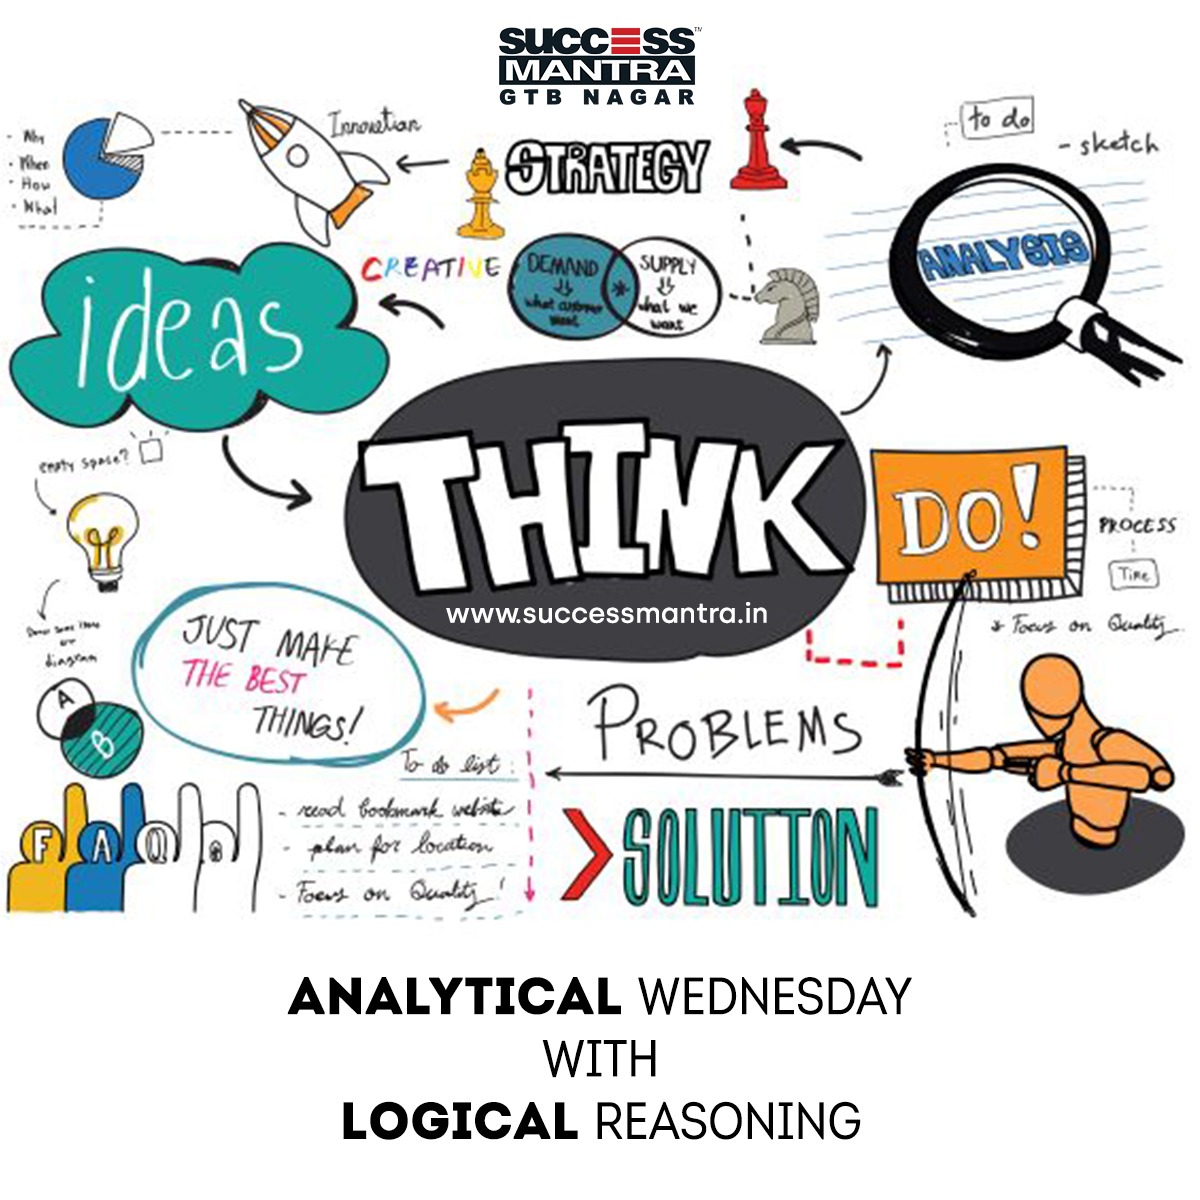 Questions on Logical Reasoning SMLRQ029